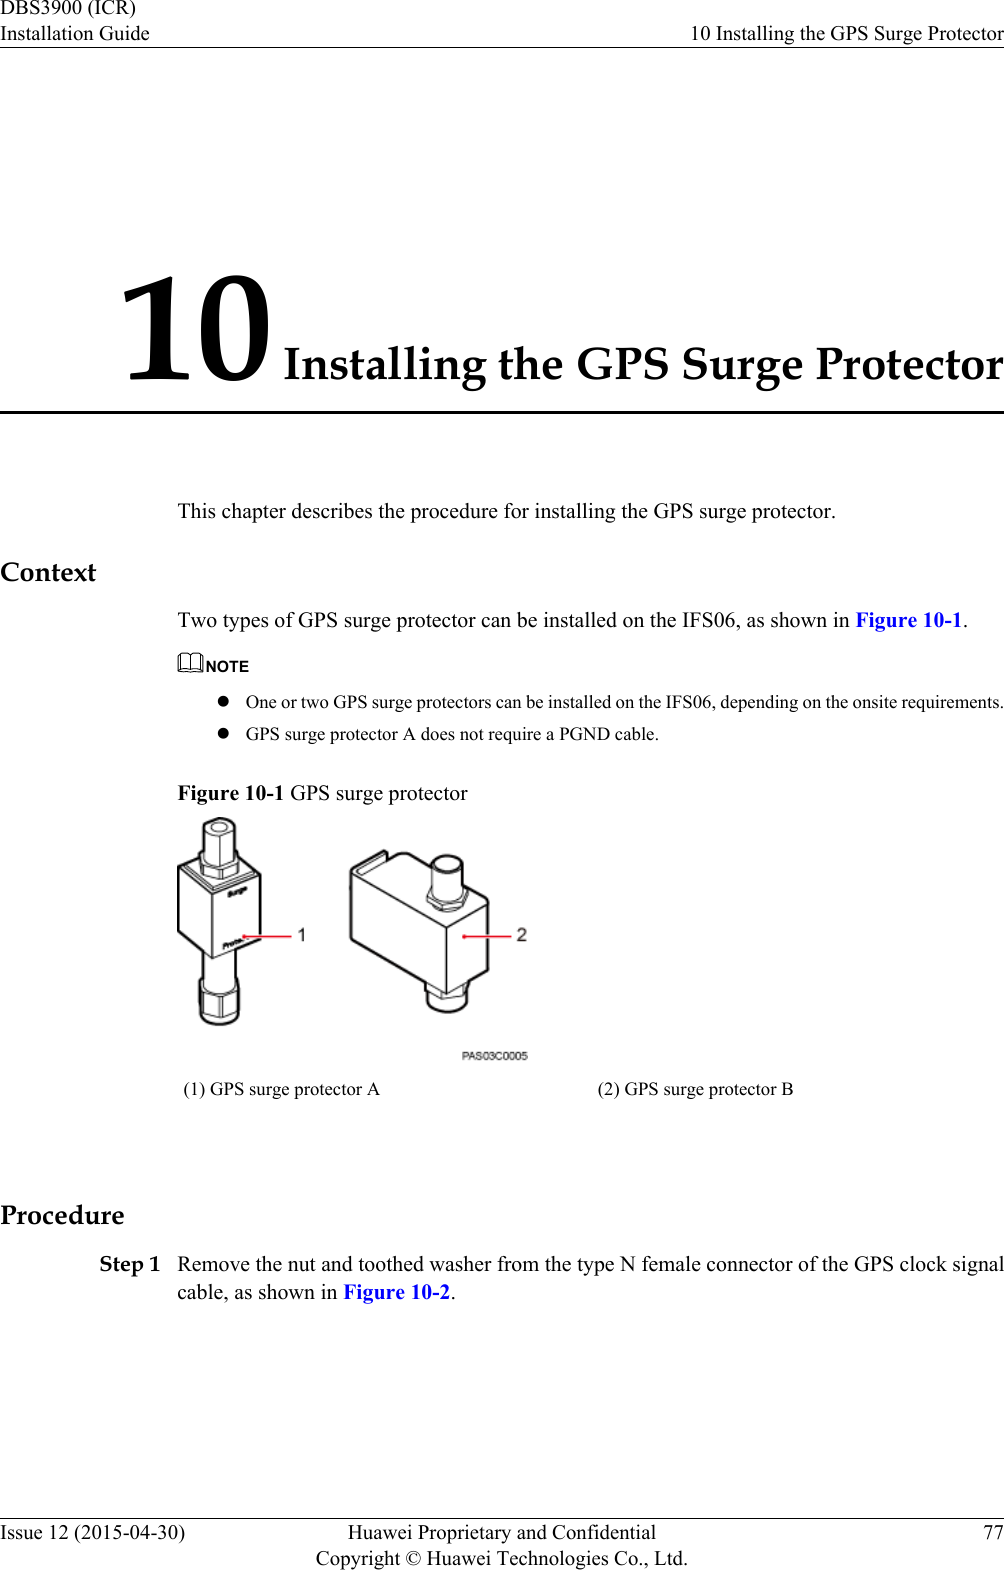 10 Installing the GPS Surge ProtectorThis chapter describes the procedure for installing the GPS surge protector.ContextTwo types of GPS surge protector can be installed on the IFS06, as shown in Figure 10-1.NOTElOne or two GPS surge protectors can be installed on the IFS06, depending on the onsite requirements.lGPS surge protector A does not require a PGND cable.Figure 10-1 GPS surge protector(1) GPS surge protector A (2) GPS surge protector B ProcedureStep 1 Remove the nut and toothed washer from the type N female connector of the GPS clock signalcable, as shown in Figure 10-2.DBS3900 (ICR)Installation Guide 10 Installing the GPS Surge ProtectorIssue 12 (2015-04-30) Huawei Proprietary and ConfidentialCopyright © Huawei Technologies Co., Ltd.77